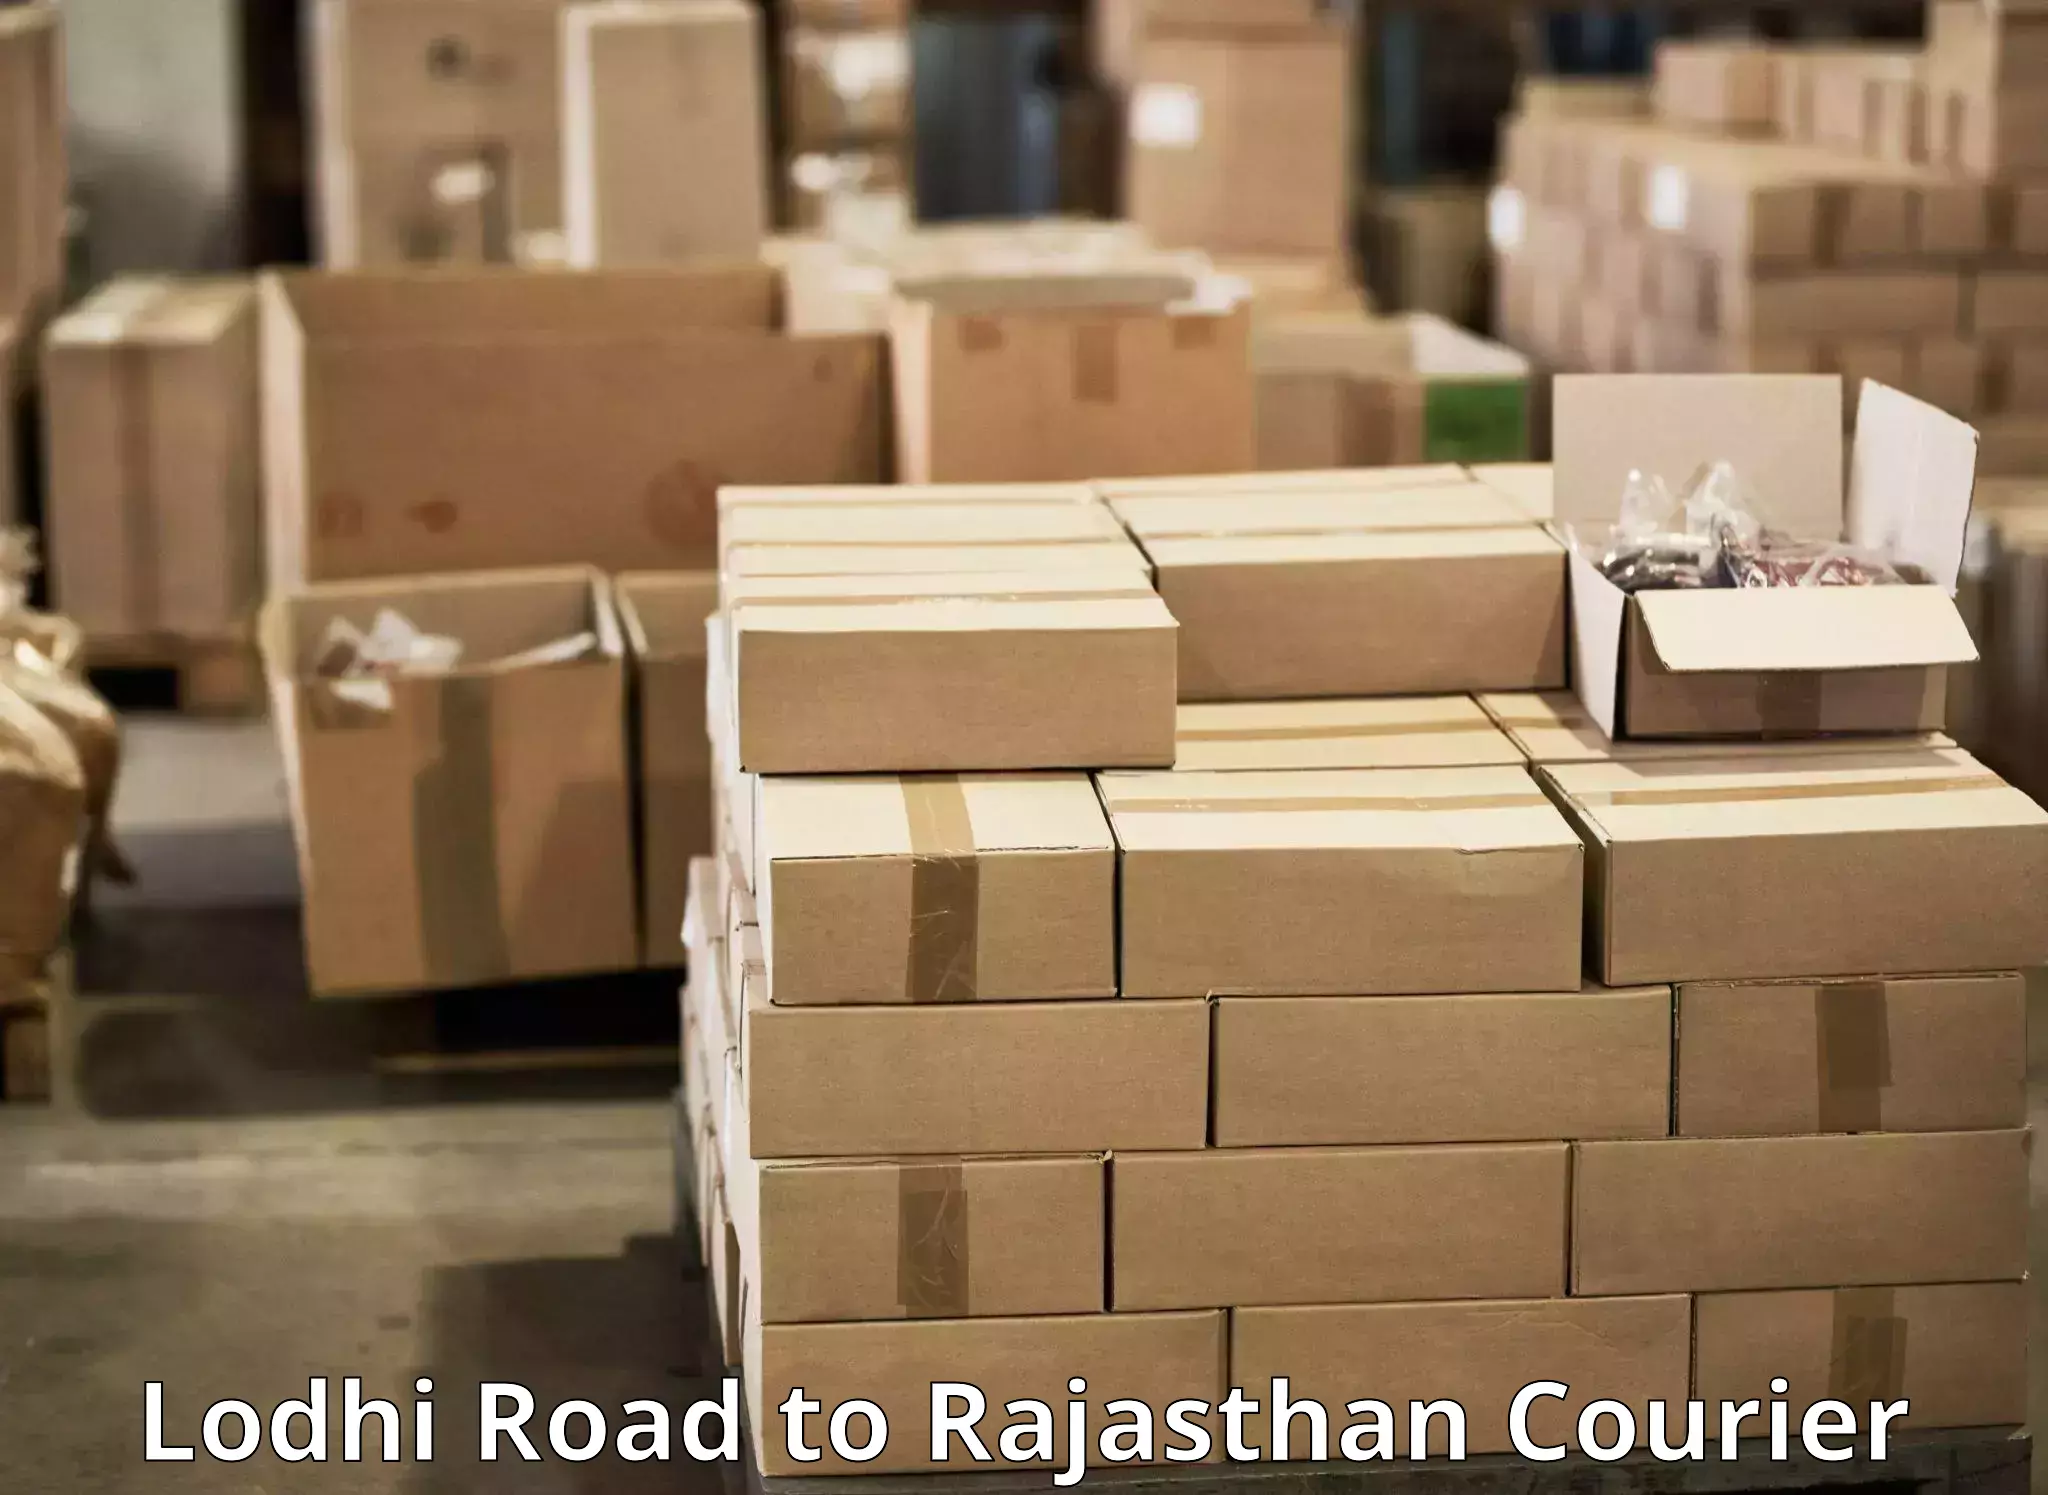 Courier service booking Lodhi Road to Nagar